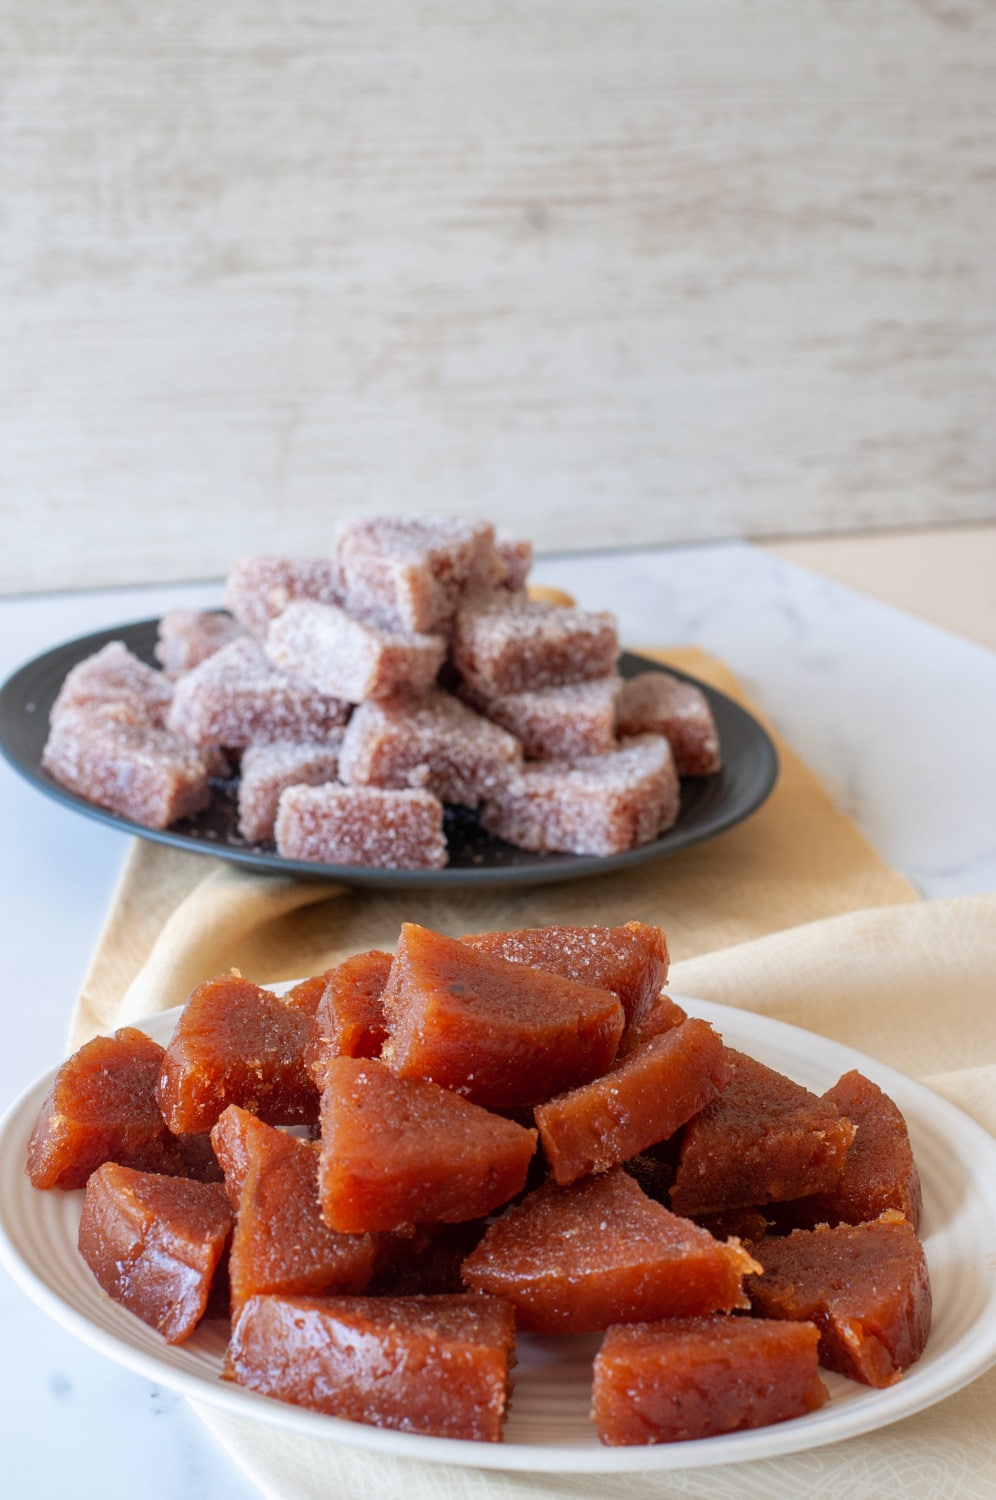 Quince Paste served plain or coated with sugar